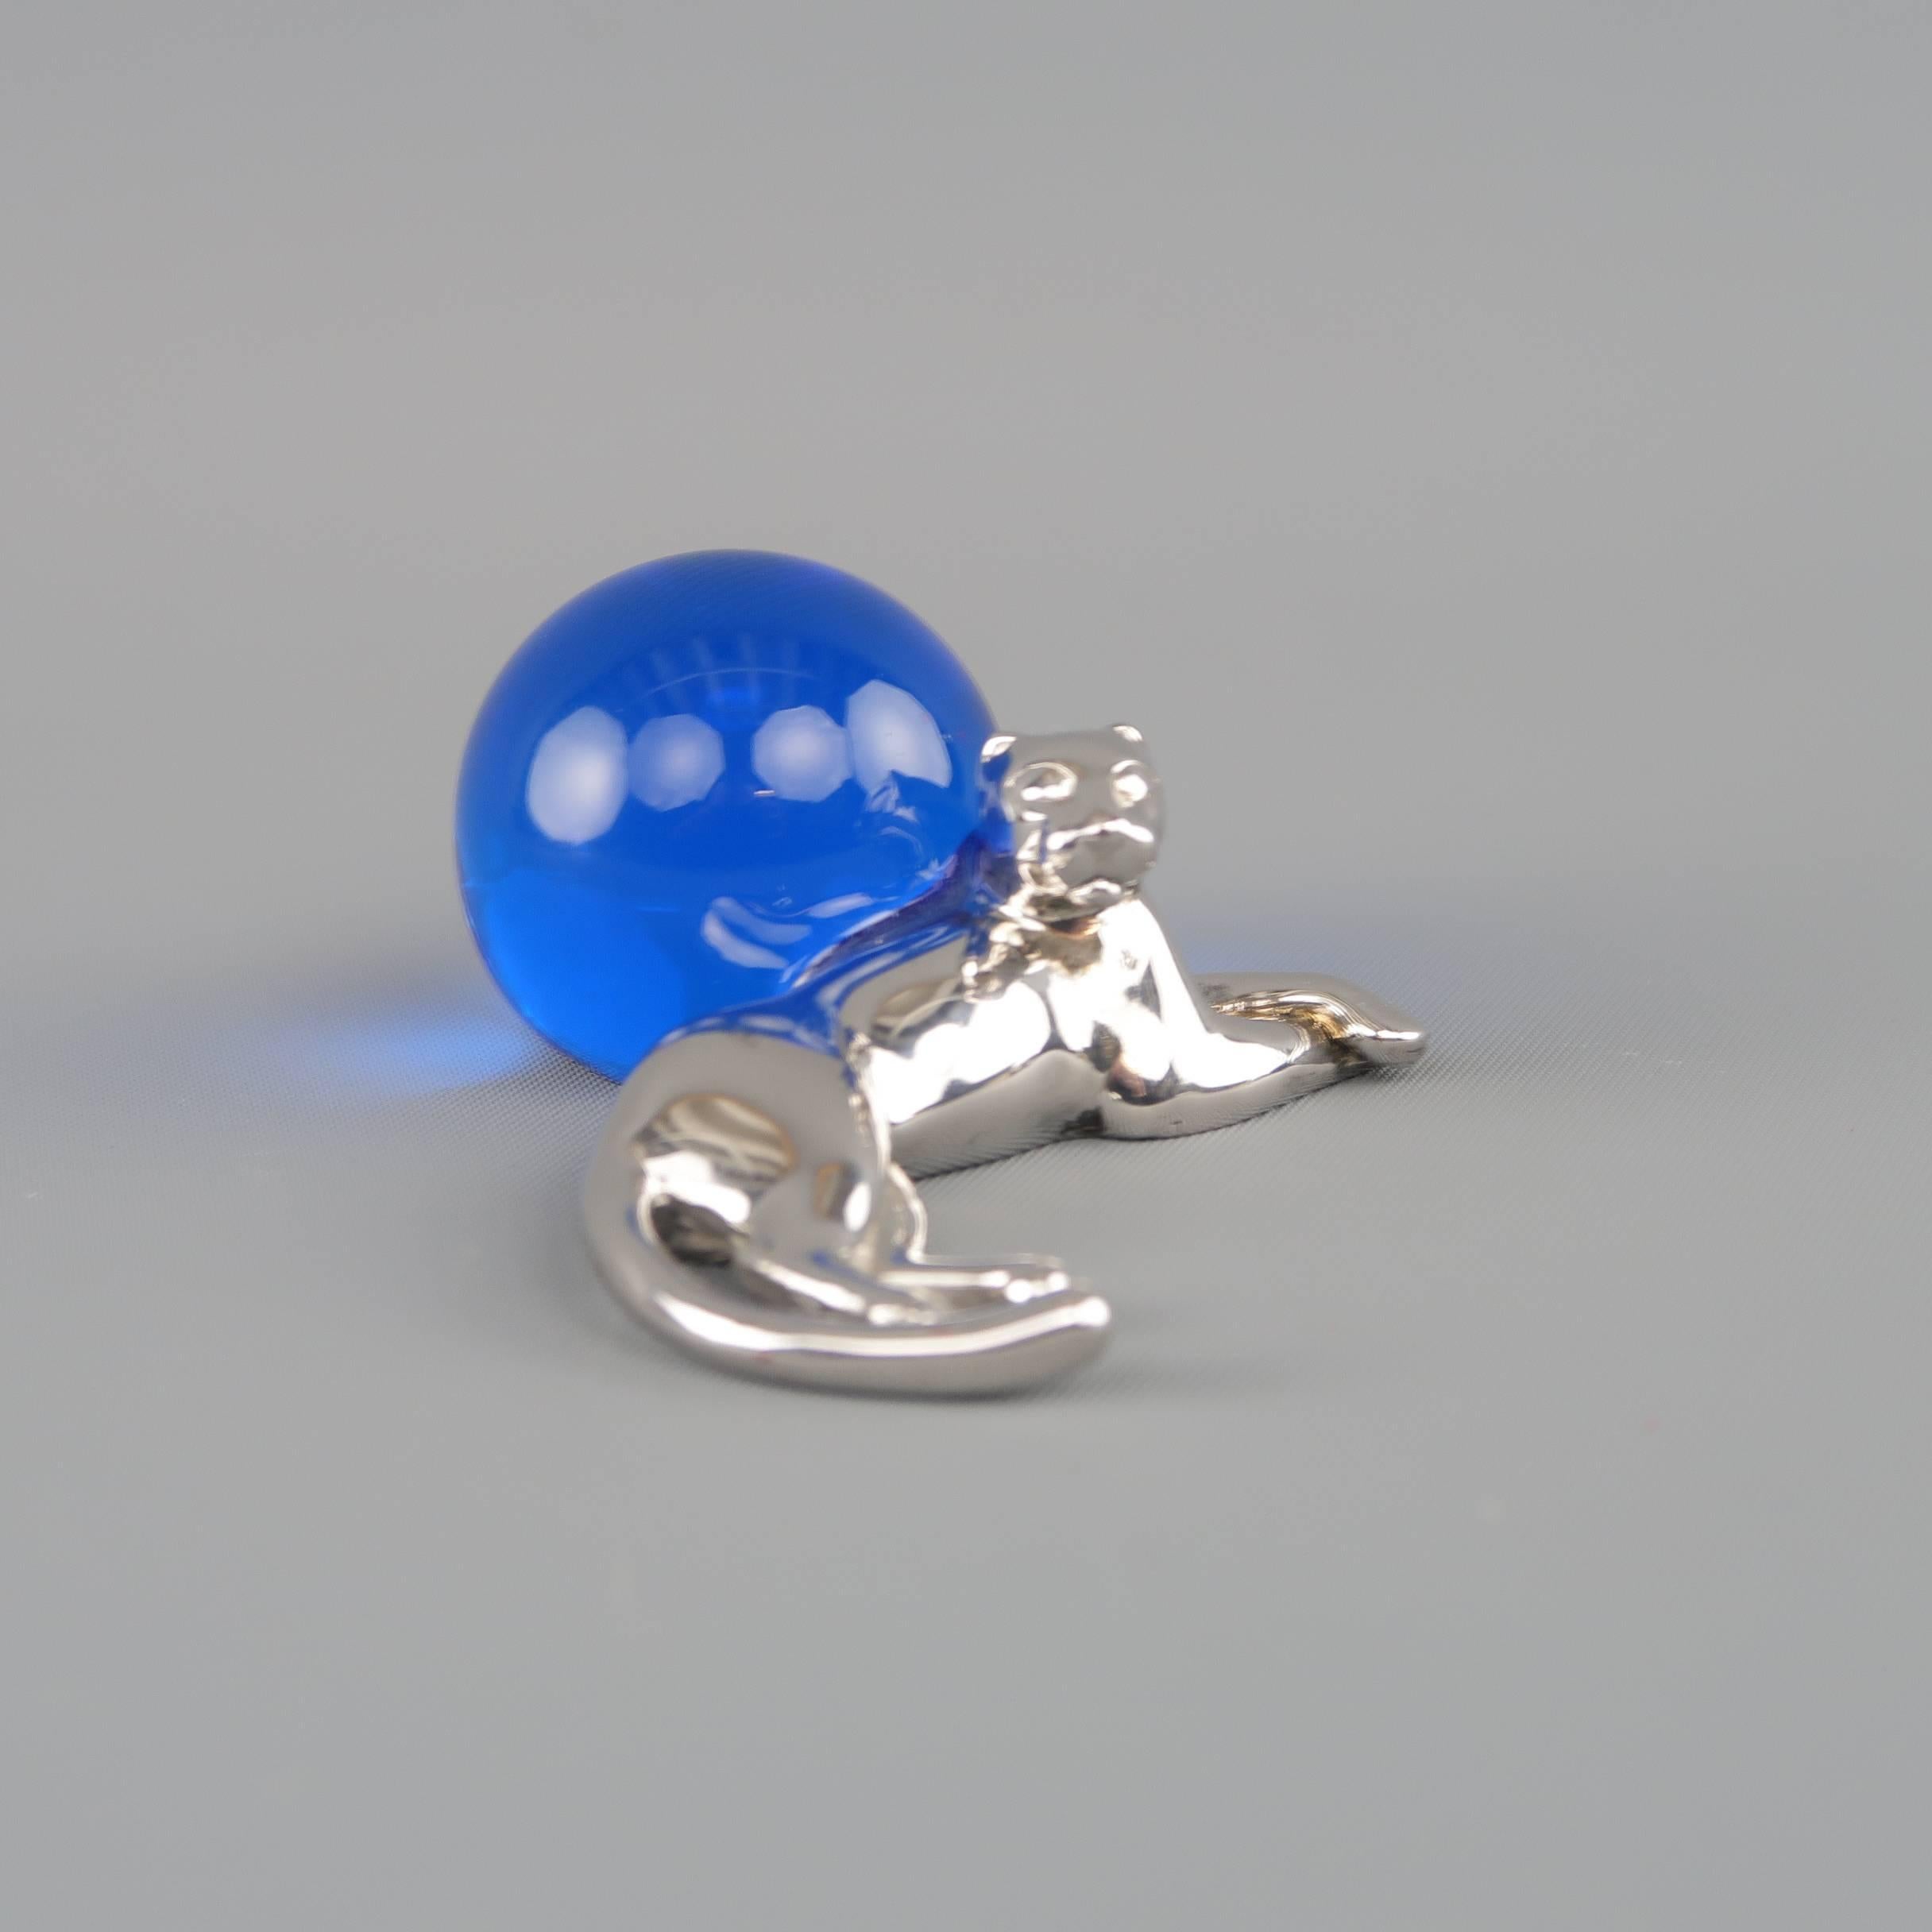 CARTIER mini paperweight features a polished sterling panther with royal blue glass crystal ball. Includes original suede dust bag. Made in Spain.
 
Good Pre-Owned Condition.
Marked: 925 SPAIN
 
Panther: 2.25 x 0.85 in.
Ball: 1.10 in.

SKU: 85631